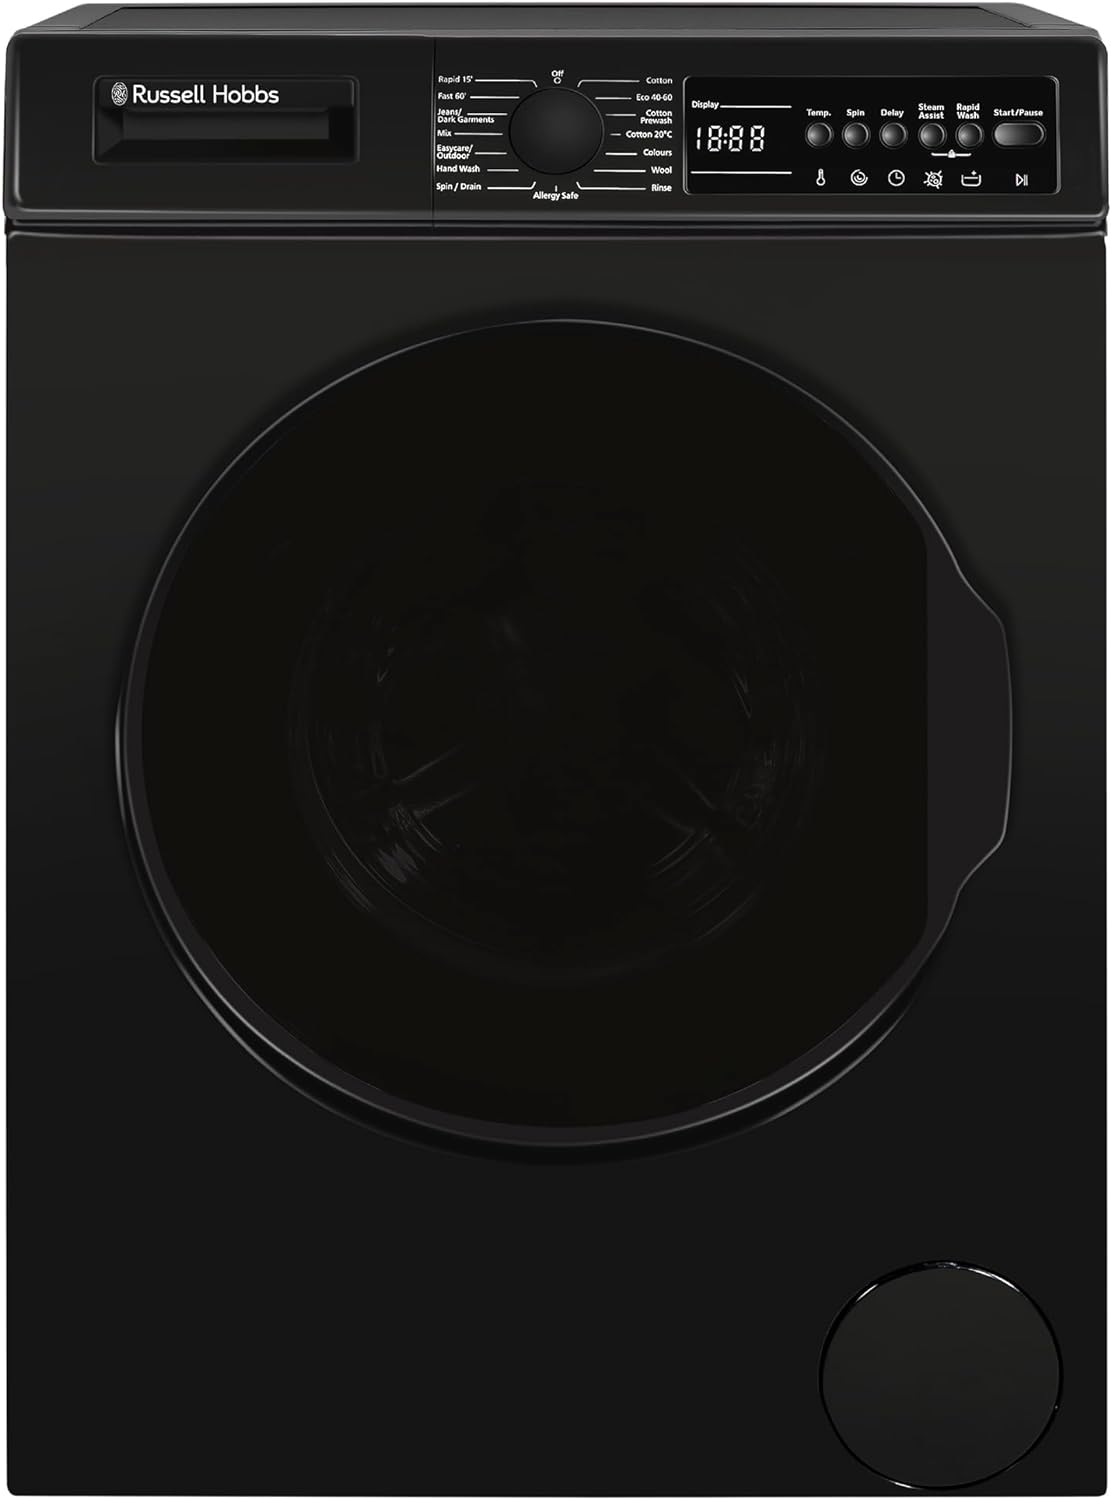 Russell Hobbs Freestanding Washing Machine, 9kg Capacity, 1400 rpm, 15 Programmes, Eco Technology, Rapid Wash Cycles, Black, RH914W116B - Amazing Gadgets Outlet